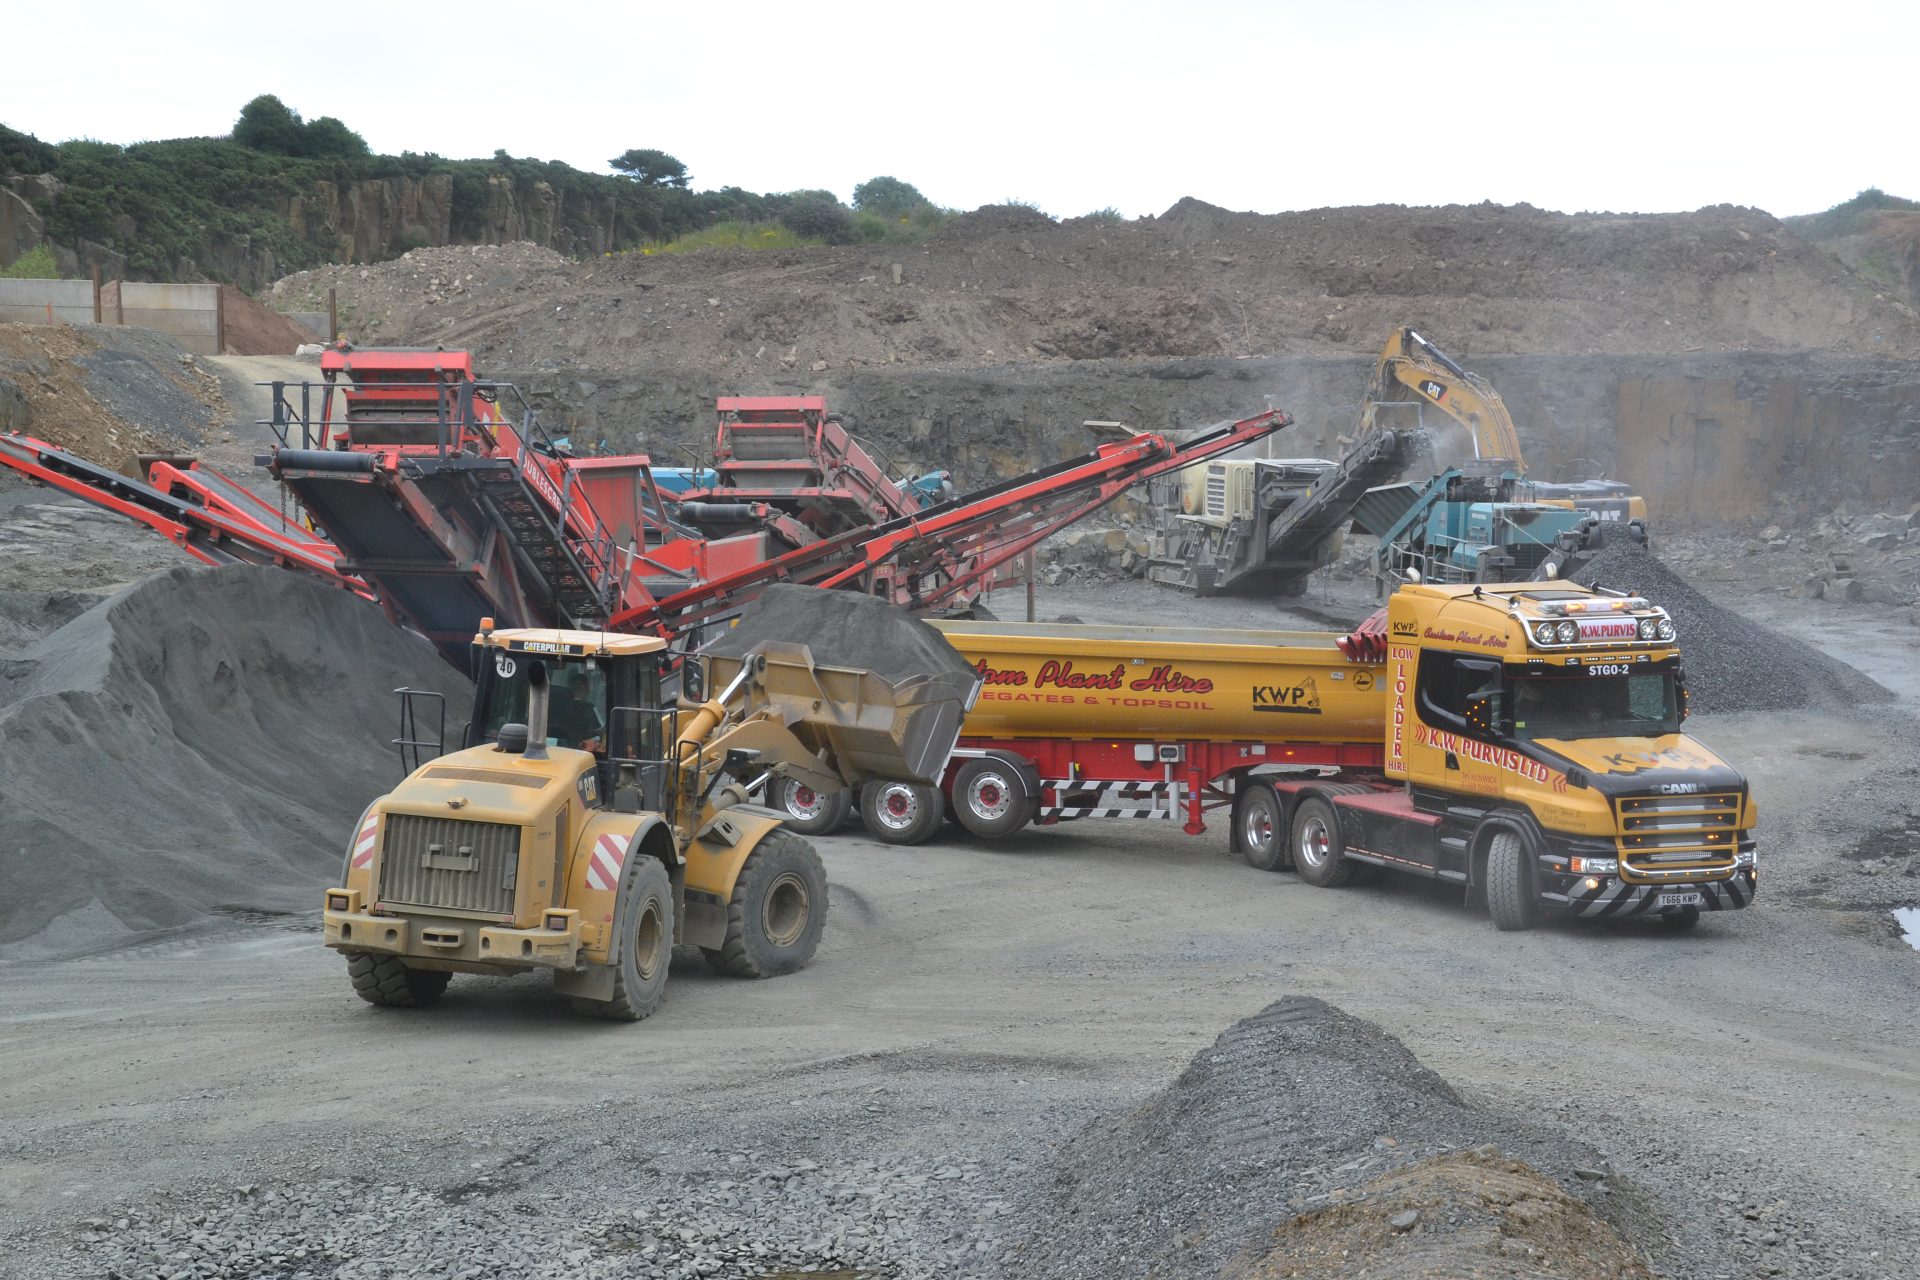 Quarry Products